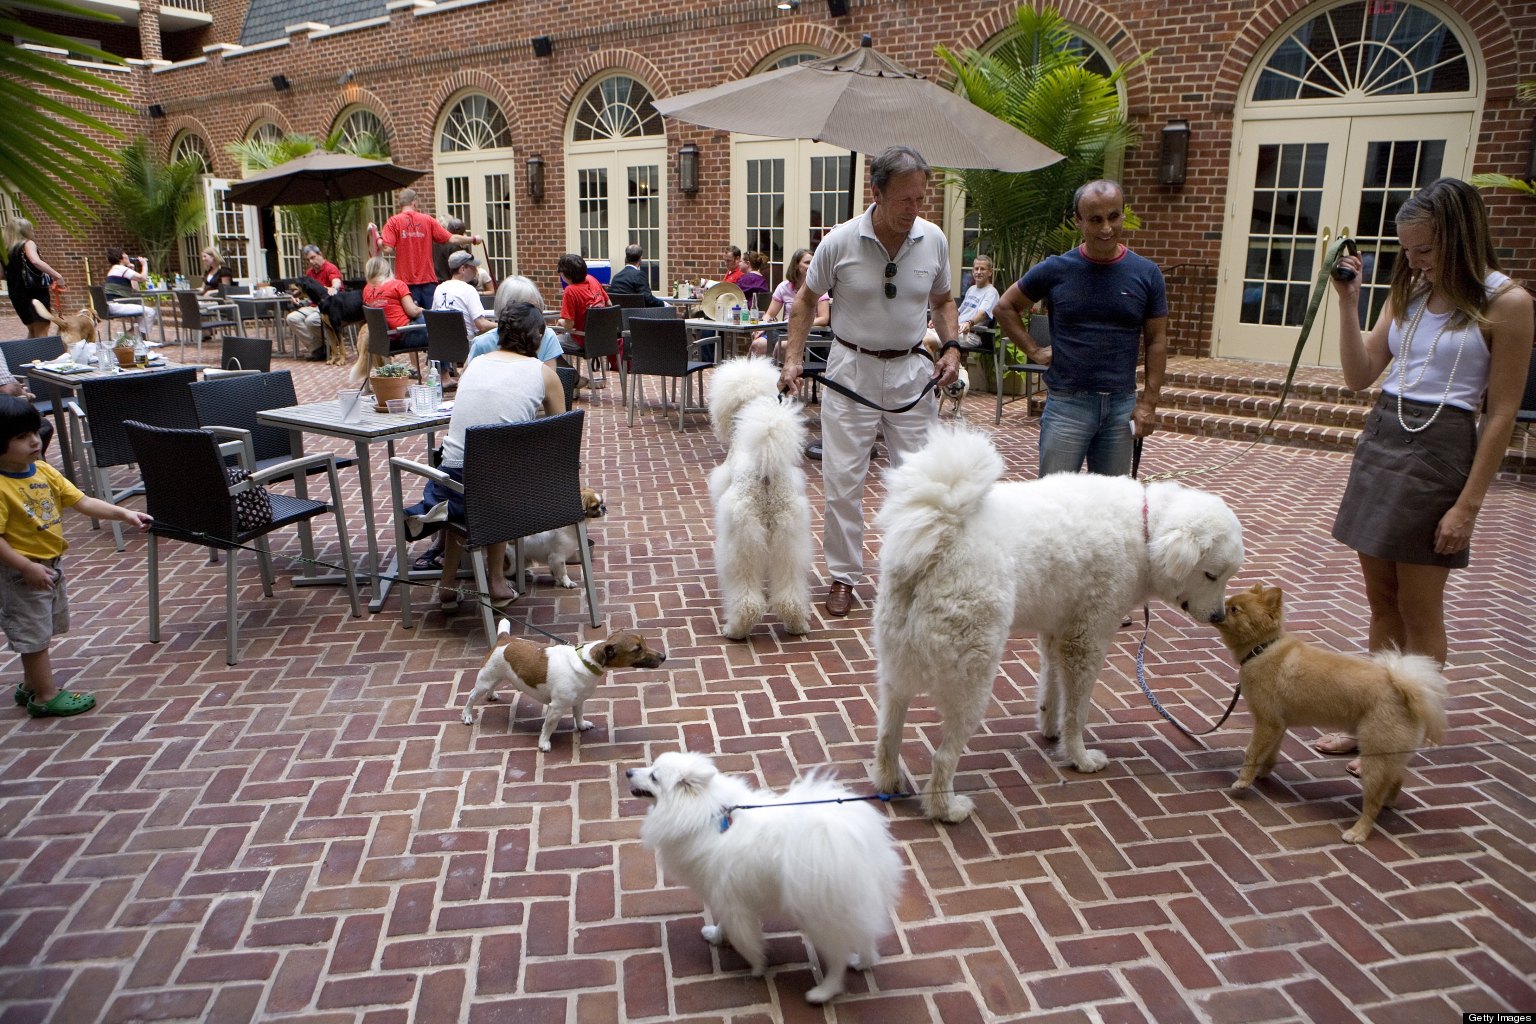 Dog-Friendly Dining In D.C.: Arlington To Allow Dogs At Outdoor